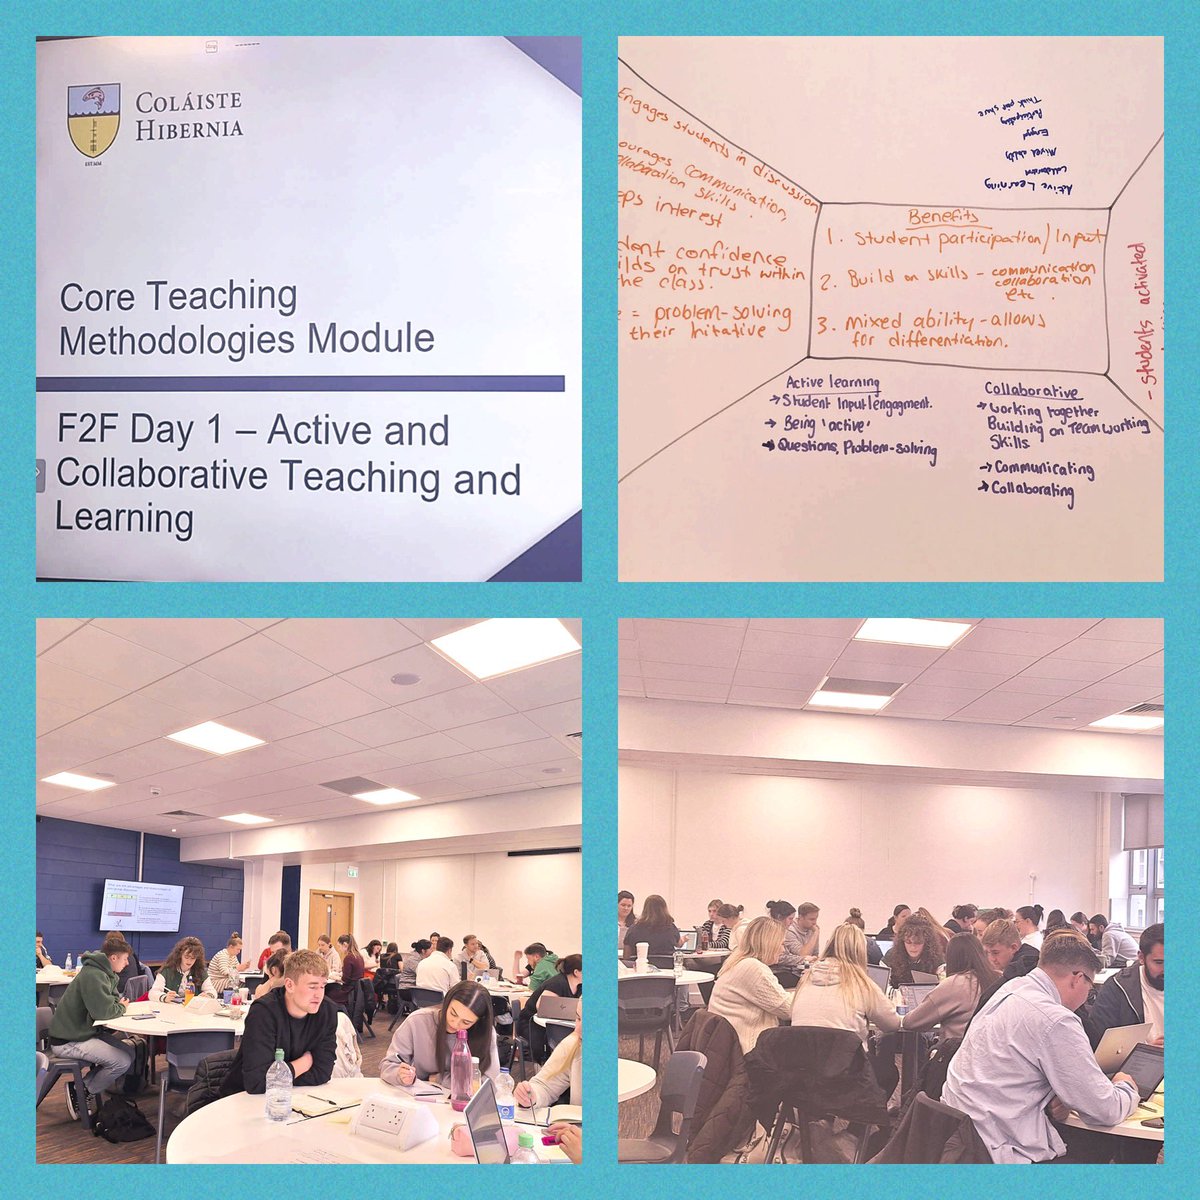 Spring 23 Core Teaching Methodologies day. Great to see high levels of engagement and active collaboration amongst all Spring 23 Post-Primary PME student teachers. #collaboration #hcbecomingateacher